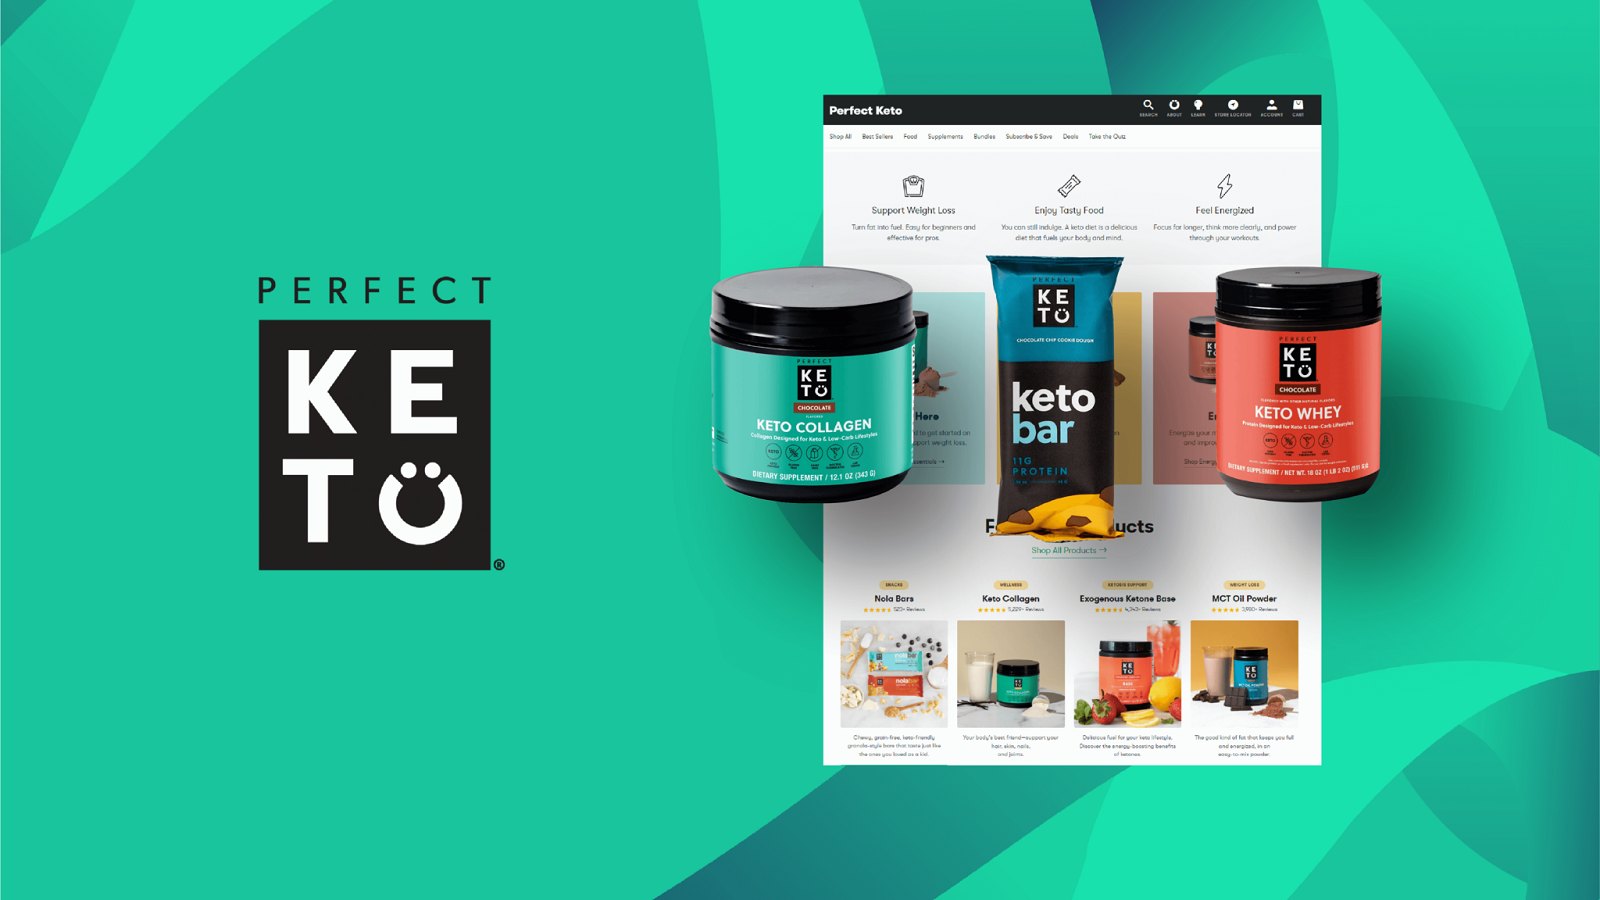 Perfect Keto Supplements Review: *Pros and Cons* Should You Try It?